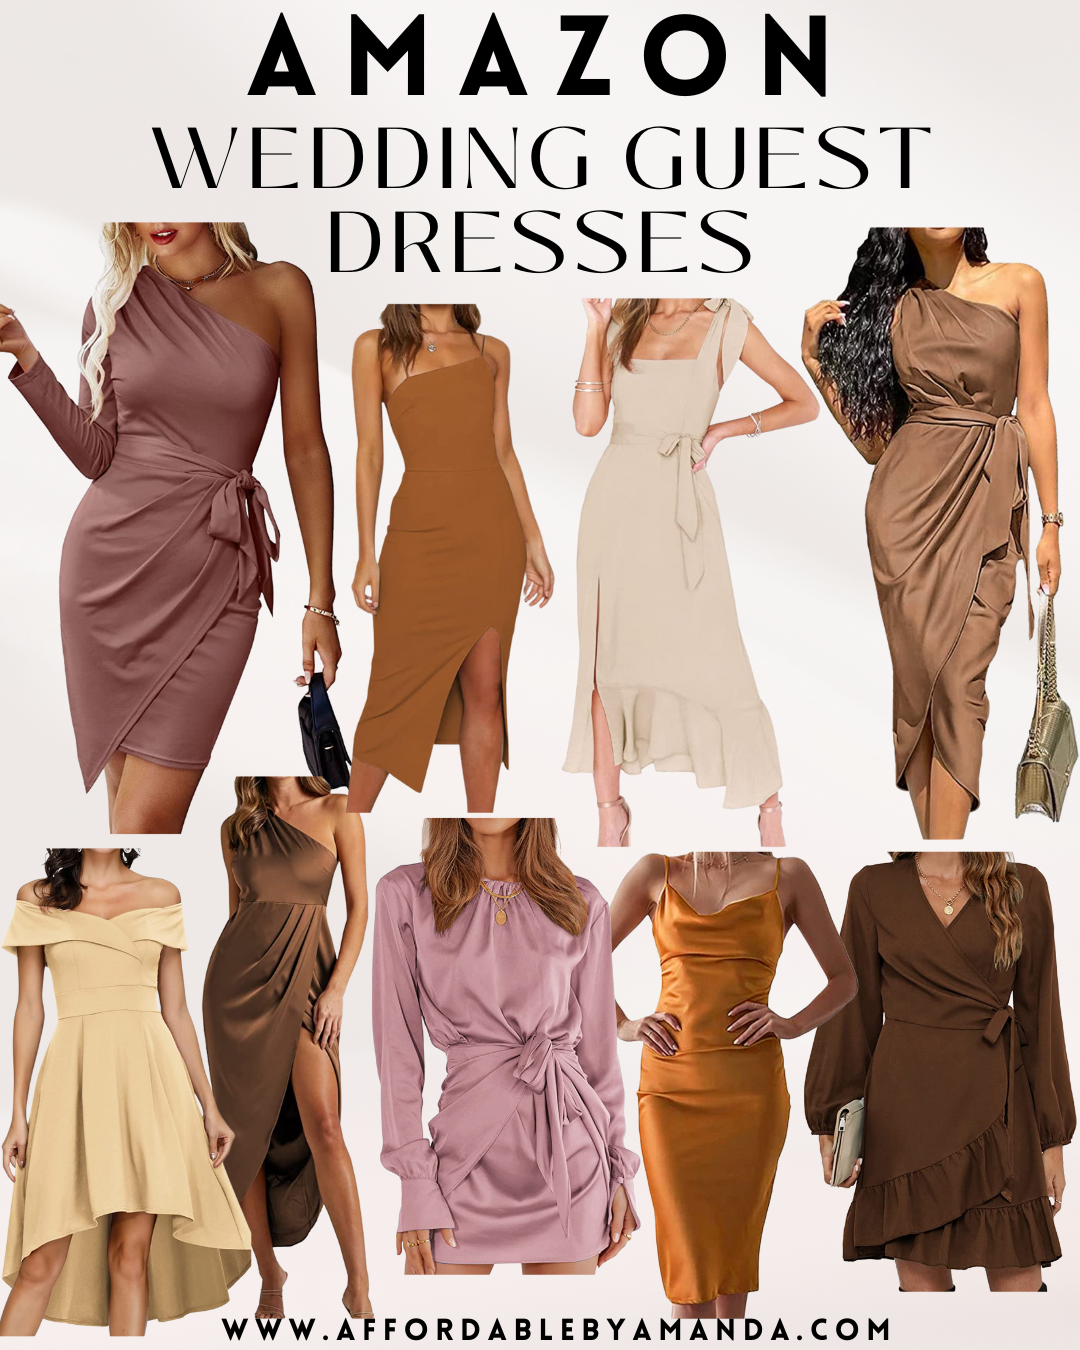 The Best Amazon Wedding Guest Dresses for Fall 2022 - Amazon Wedding Guest Dresses - Wedding Guest Dresses Under $50